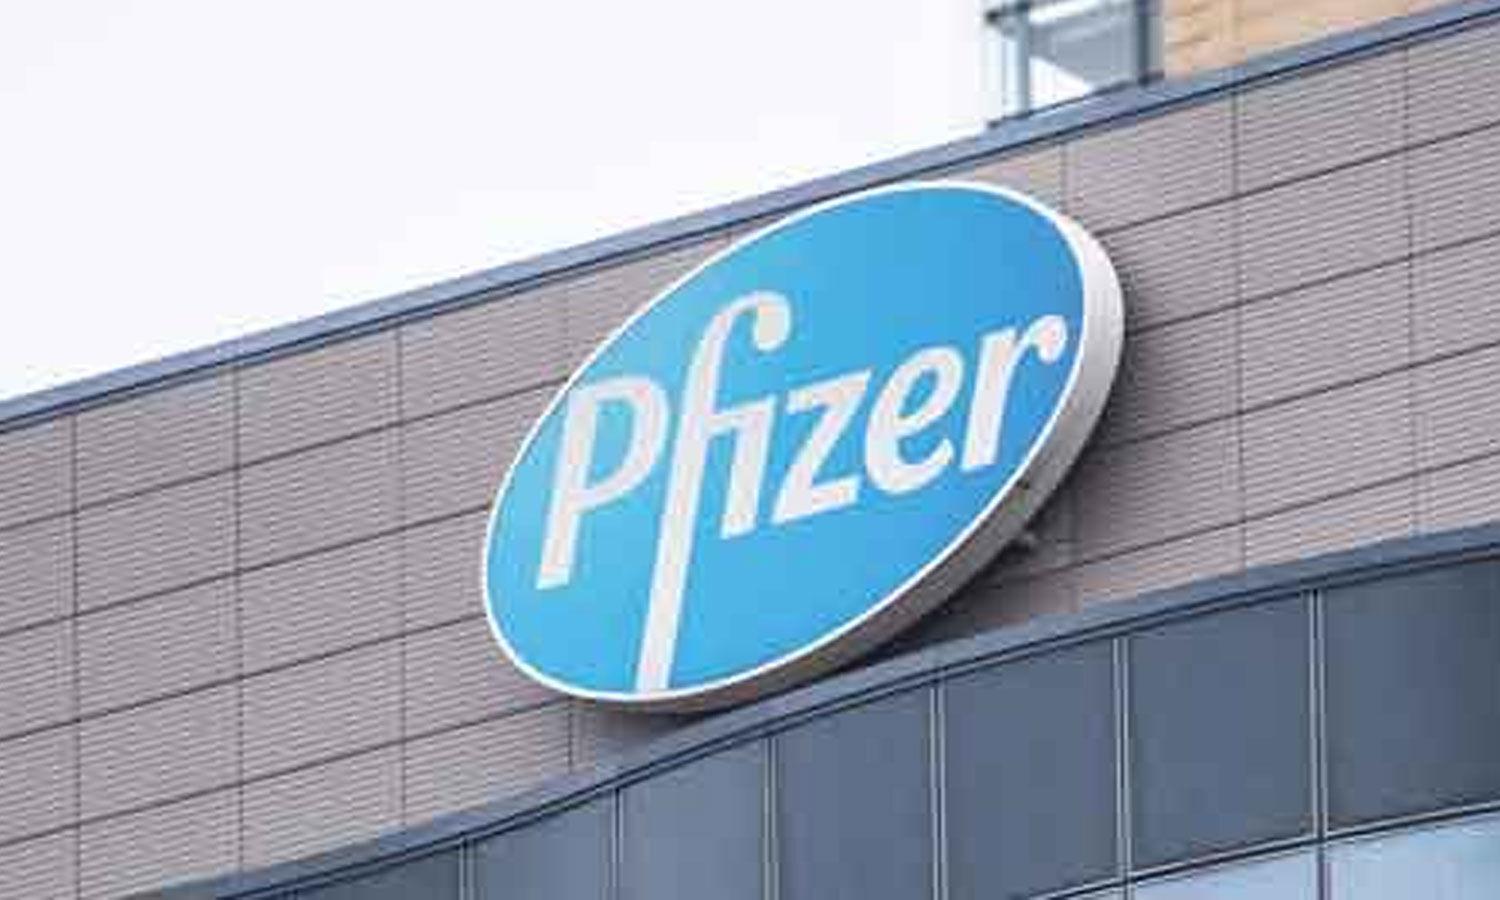 USFDA approves Pfizer supplemental New Drug Application for EUCRISA (crisaborole) ointment for children with eczema